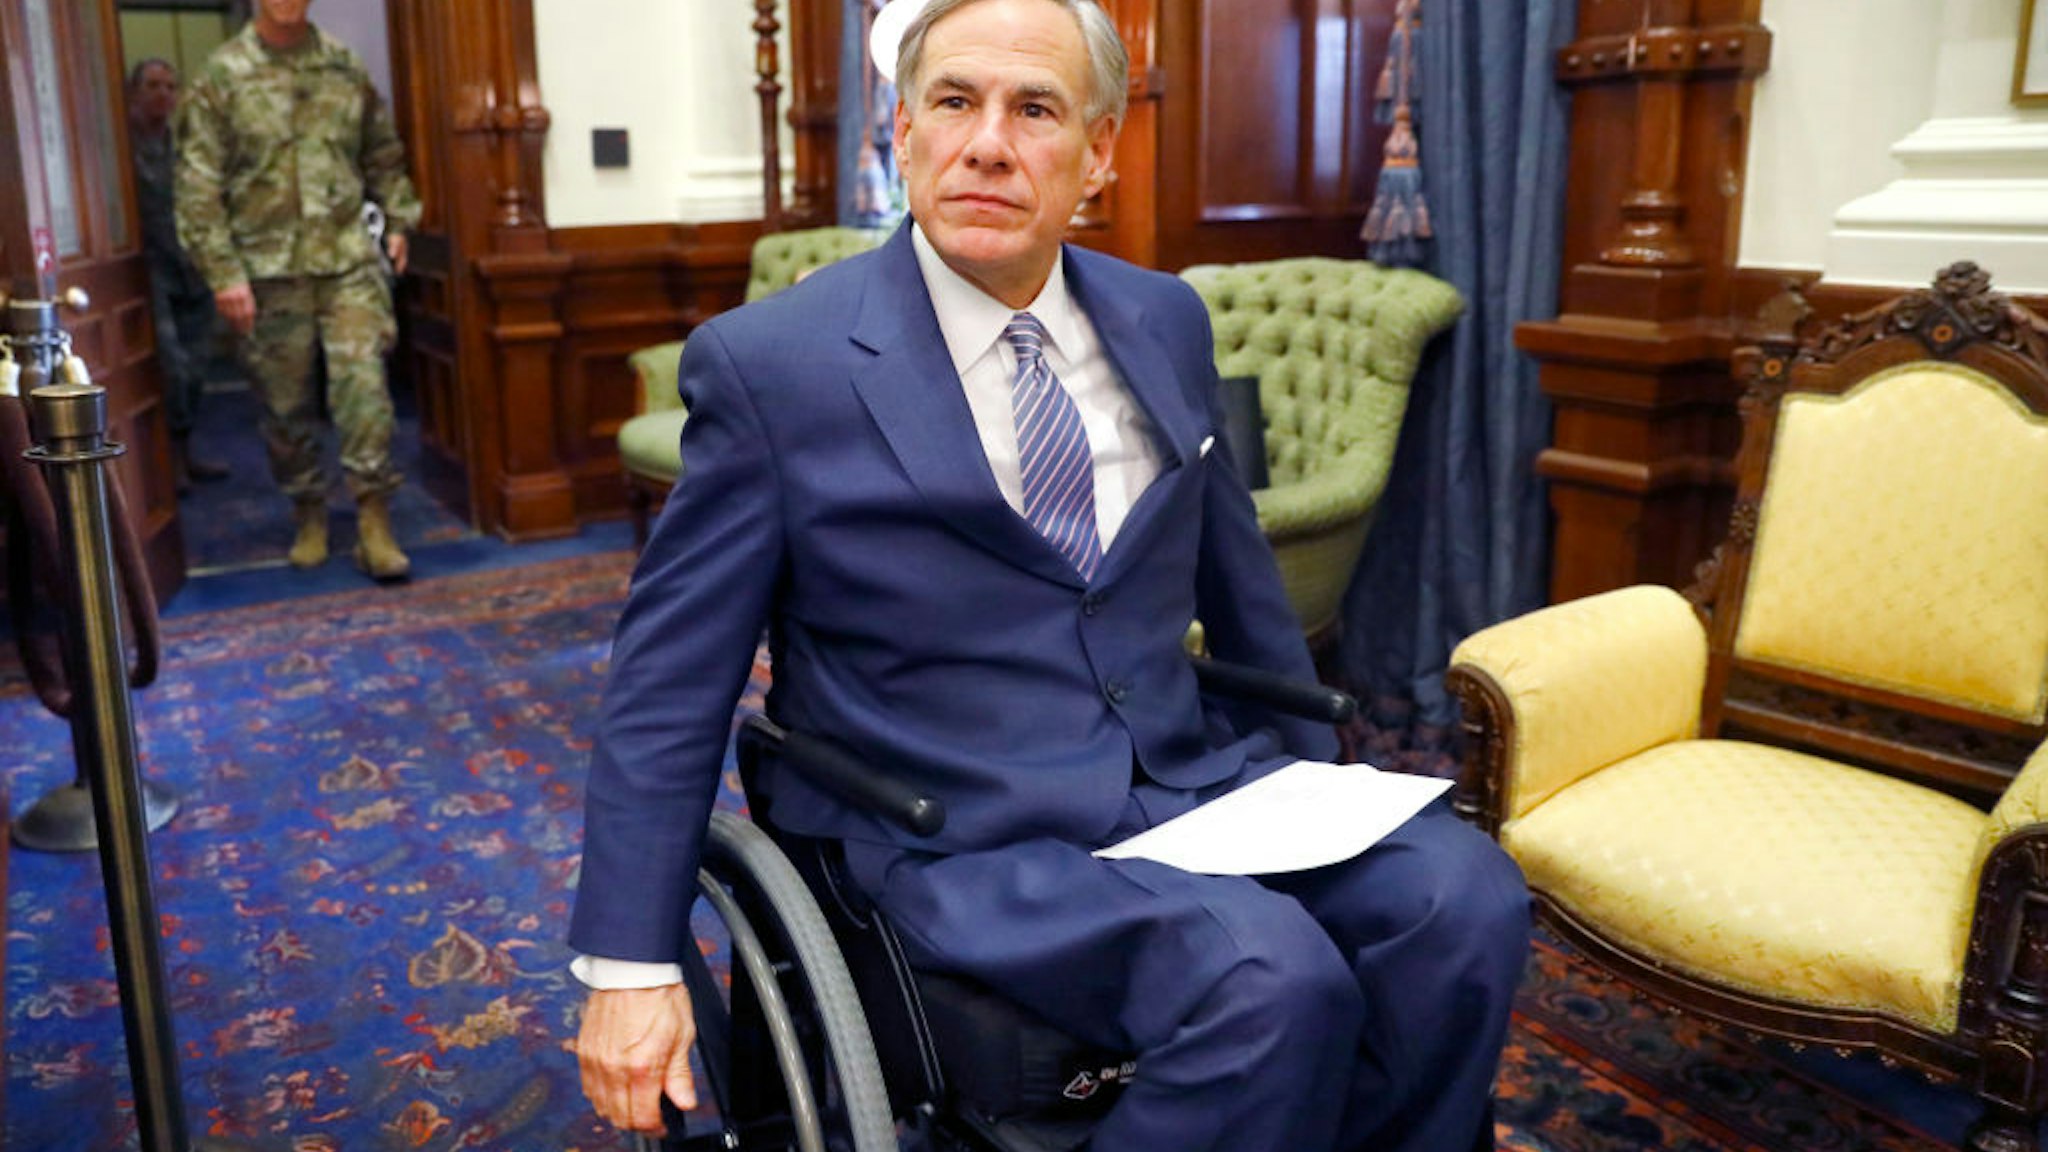 Texas Governor Greg Abbott arrives for his COVID-19 press conference at the Texas State Capitol in Austin.